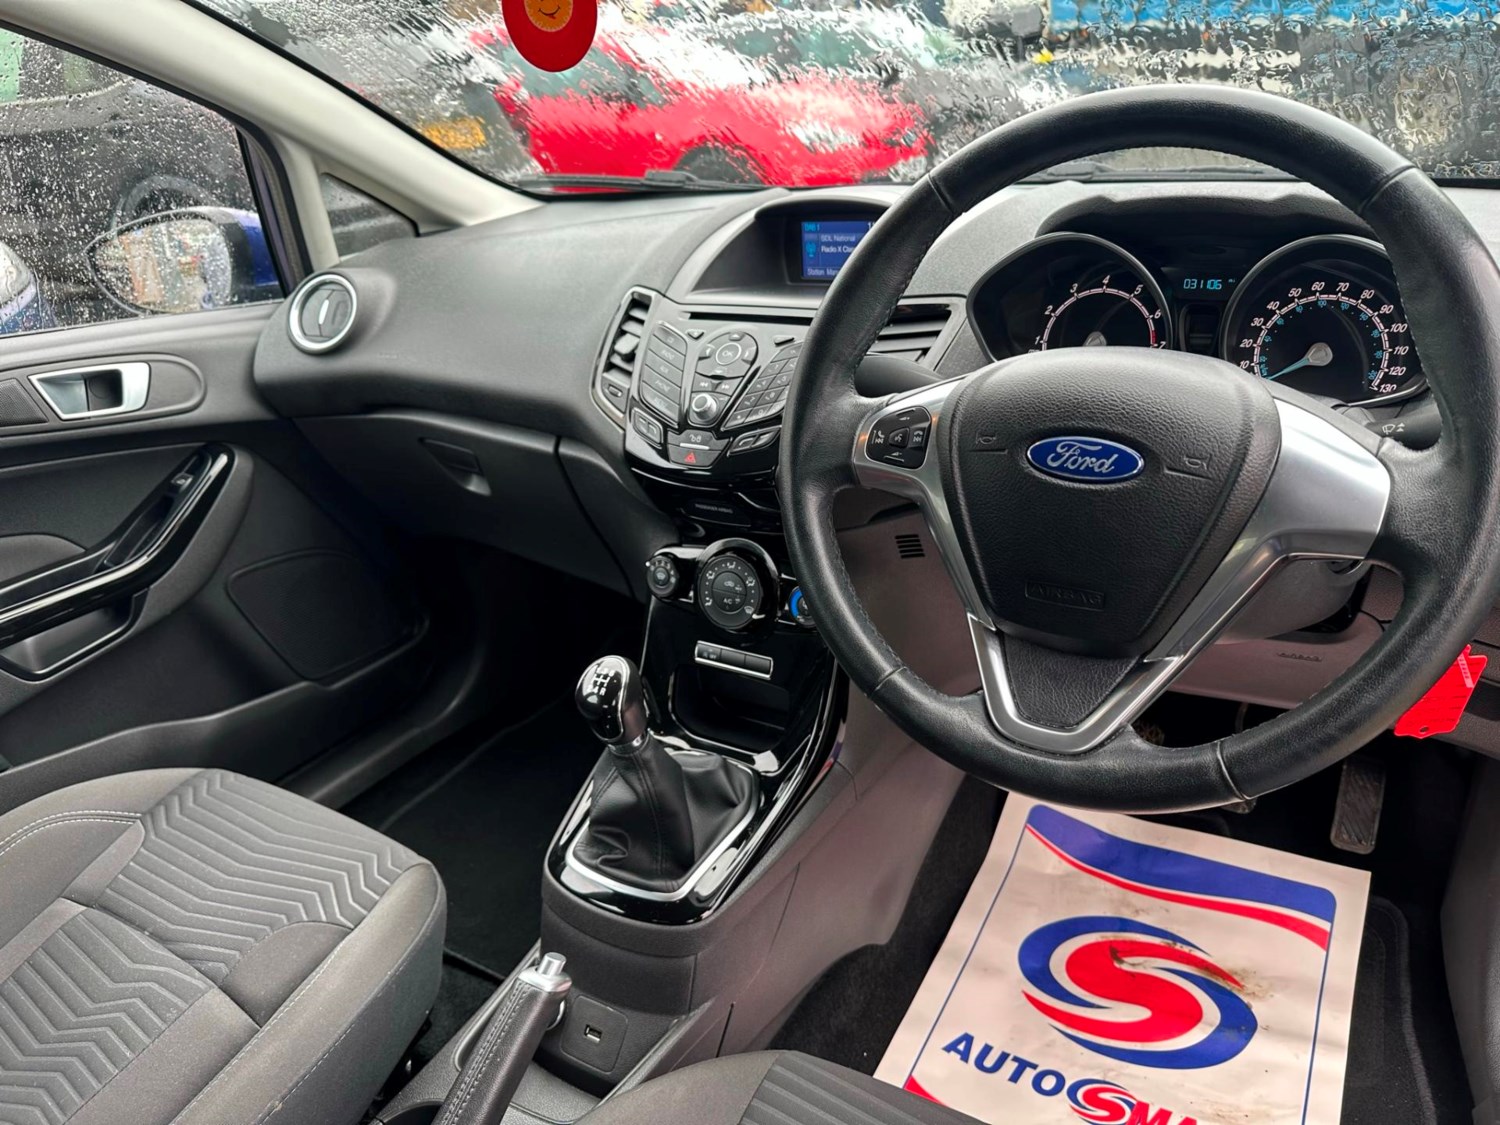 2017 (17) Ford Fiesta 1.0 EcoBoost Zetec 5dr For Sale In Launceston, Cornwall